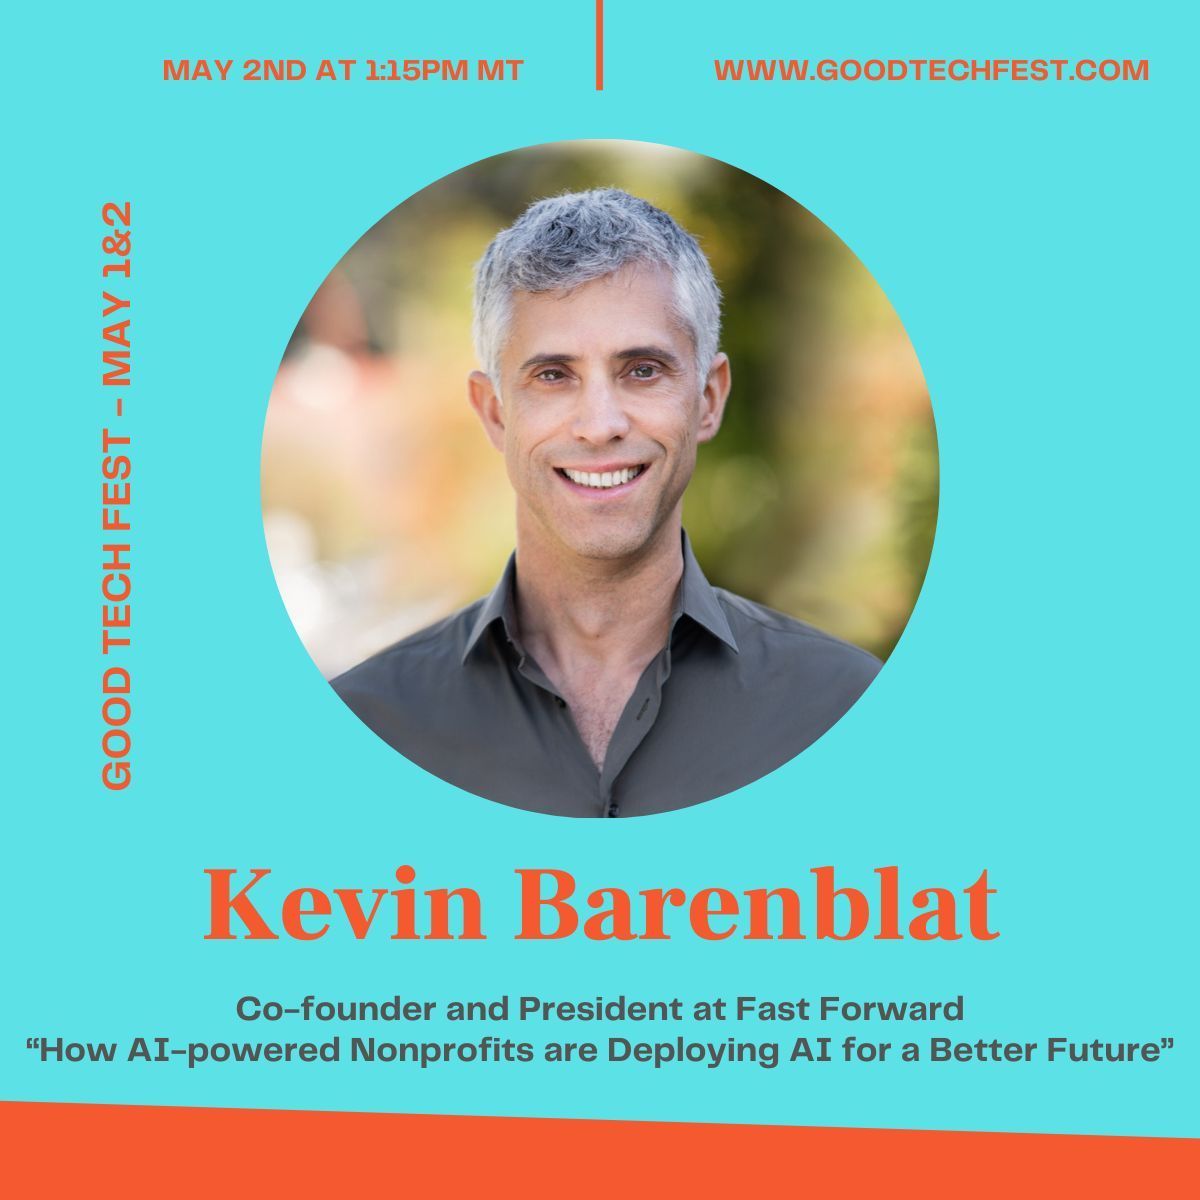 @FFWDOrg’s @barenblat will present at Good Tech Fest next week. Don’t miss this panel about “How AI-powered Nonprofits are Deploying AI for a Better Future” on Thursday, May 2 at 2:15 pm PT. Register here 👉 buff.ly/3QcjtNK